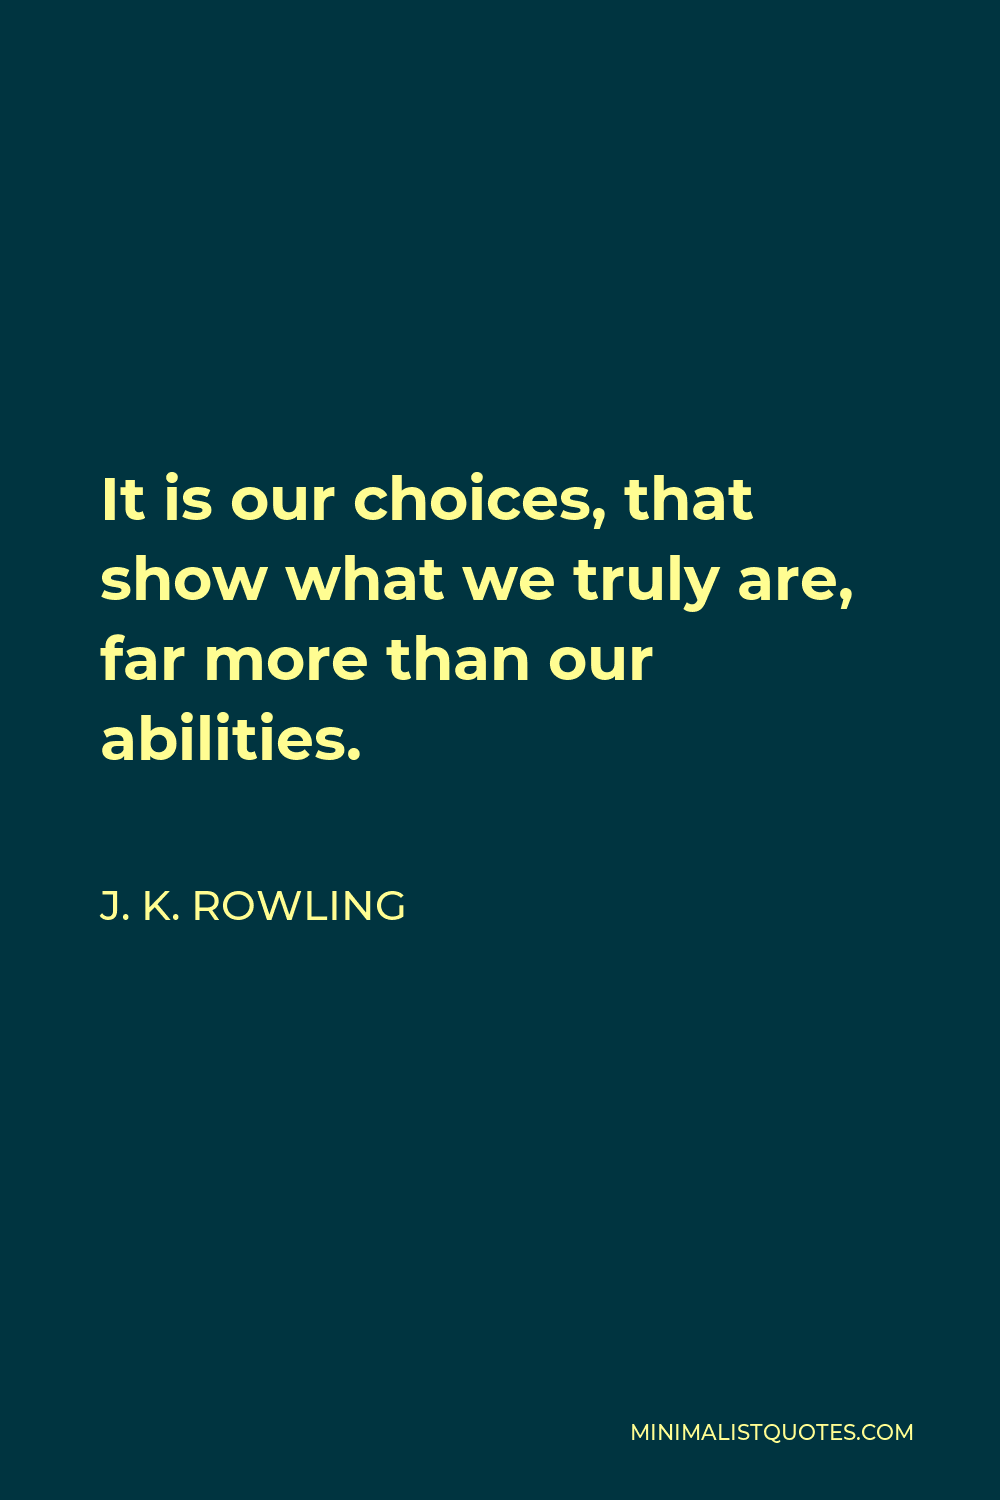 J. K. Rowling Quote - It is our choices, that show what we truly are, far more than our abilities.